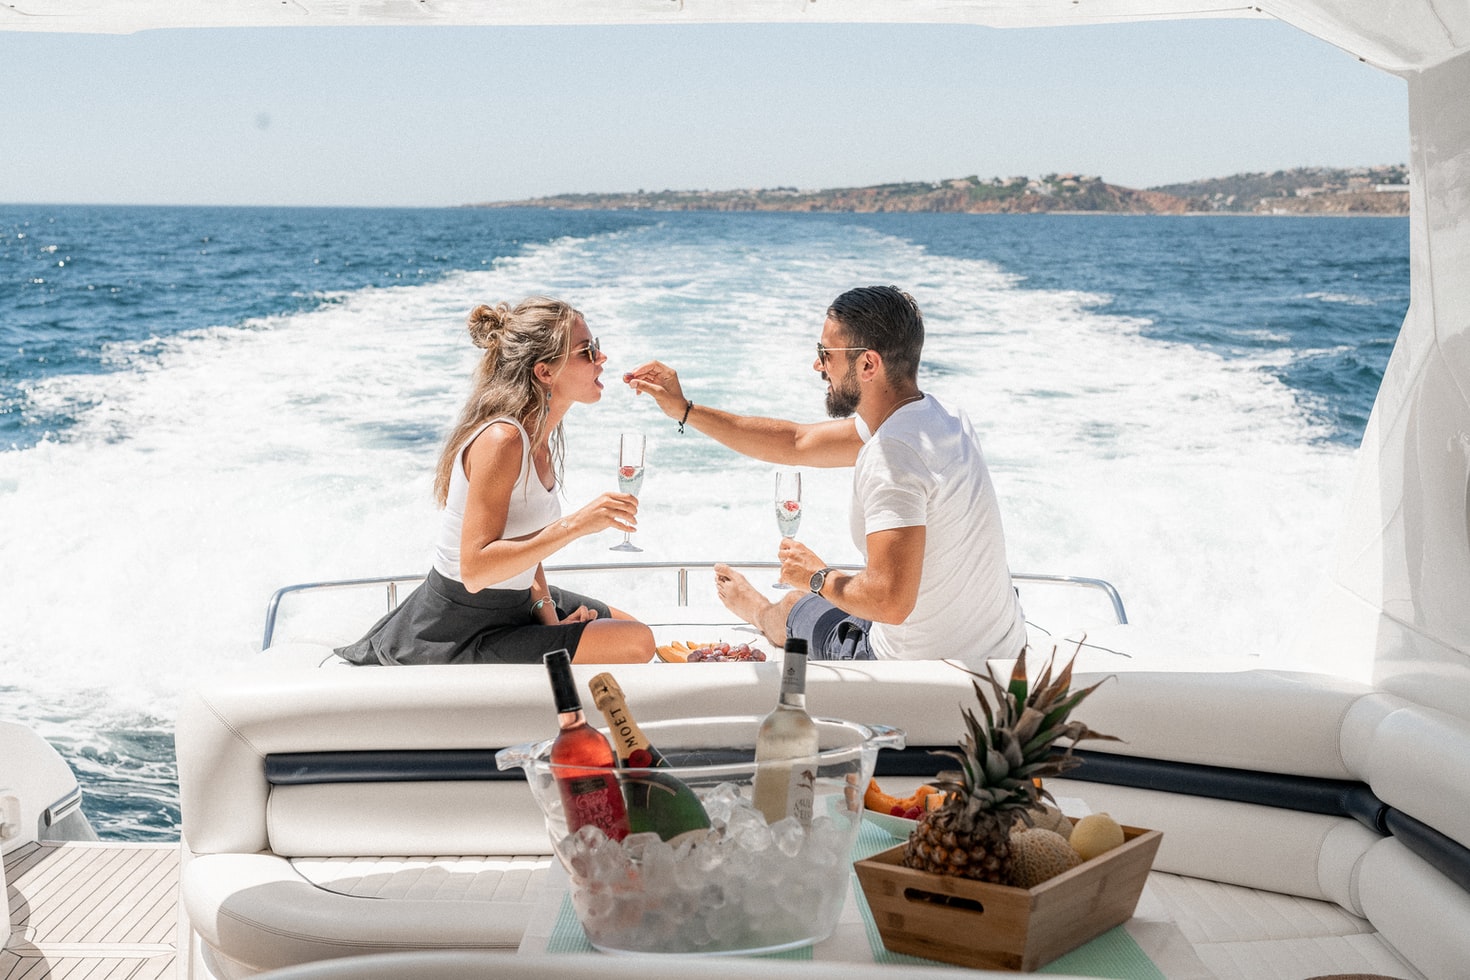 Private Yachting Is On The Rise. Here’s Why